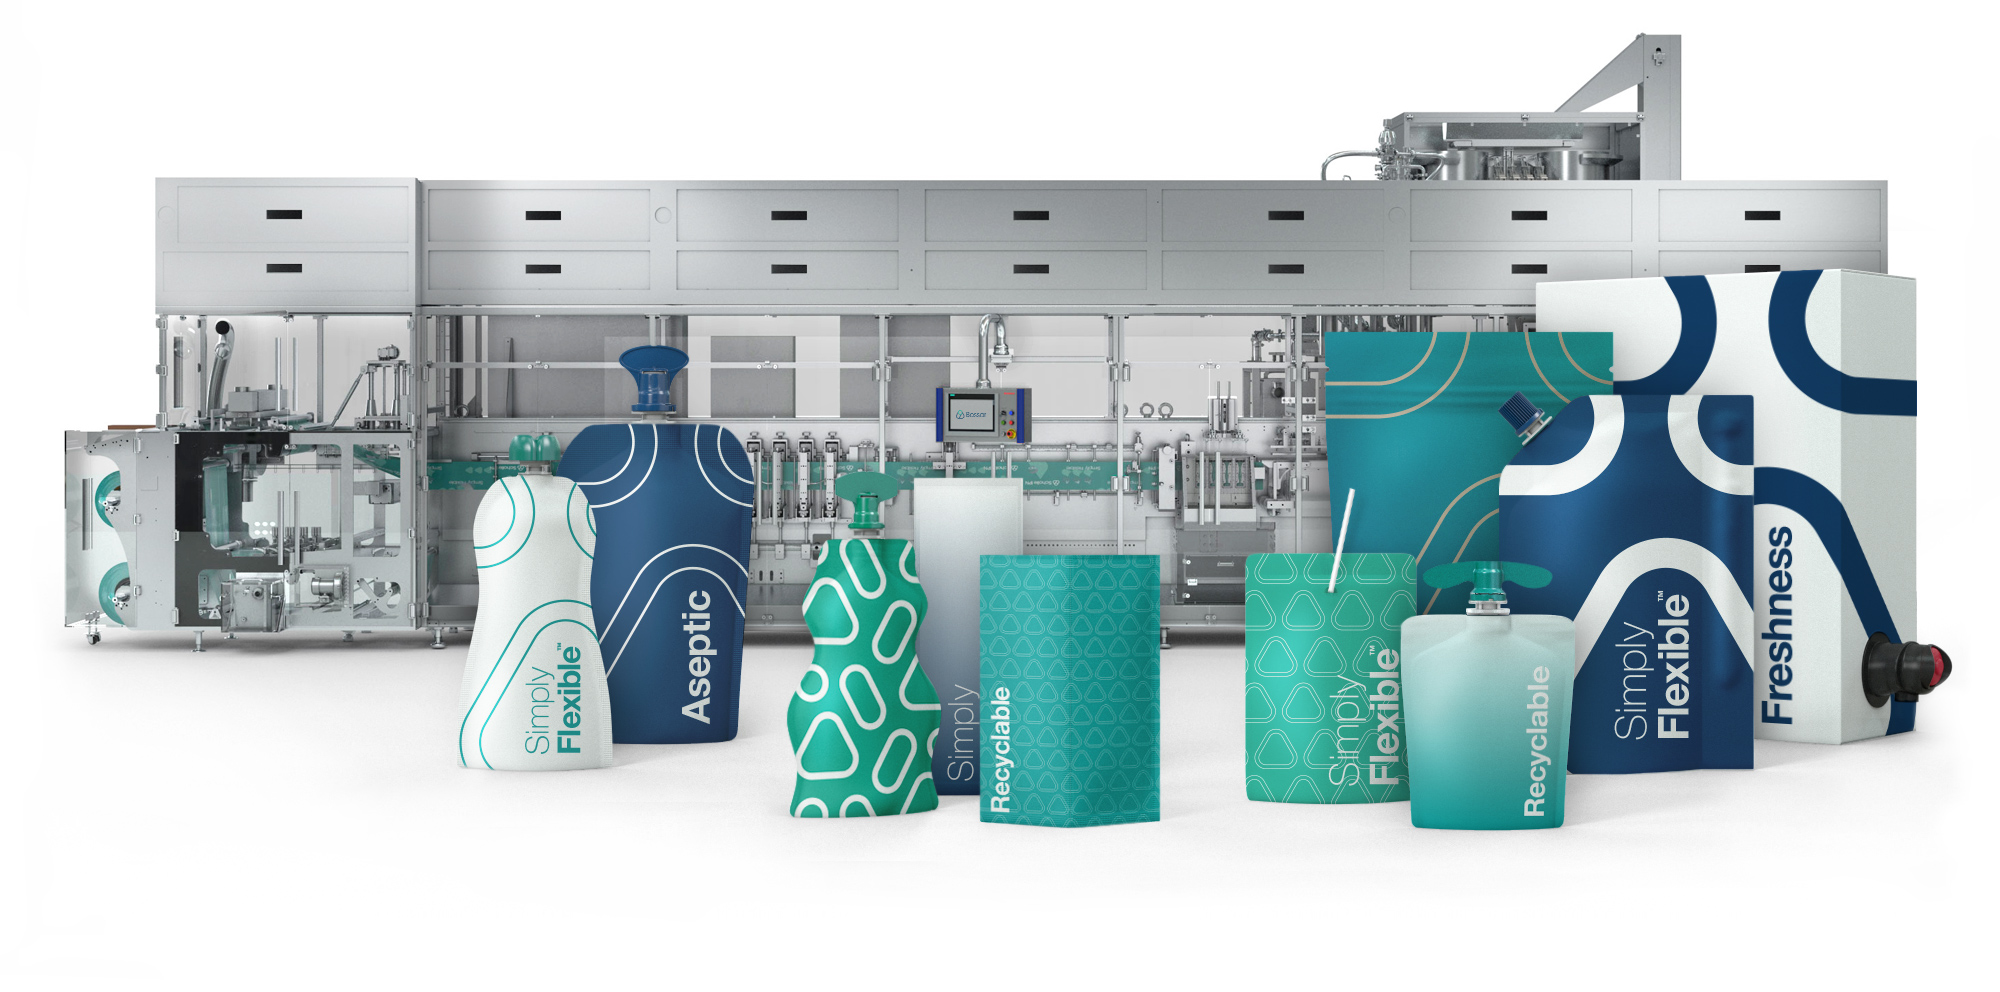 bossar packaging at the forefront of hffs technology an example primary material